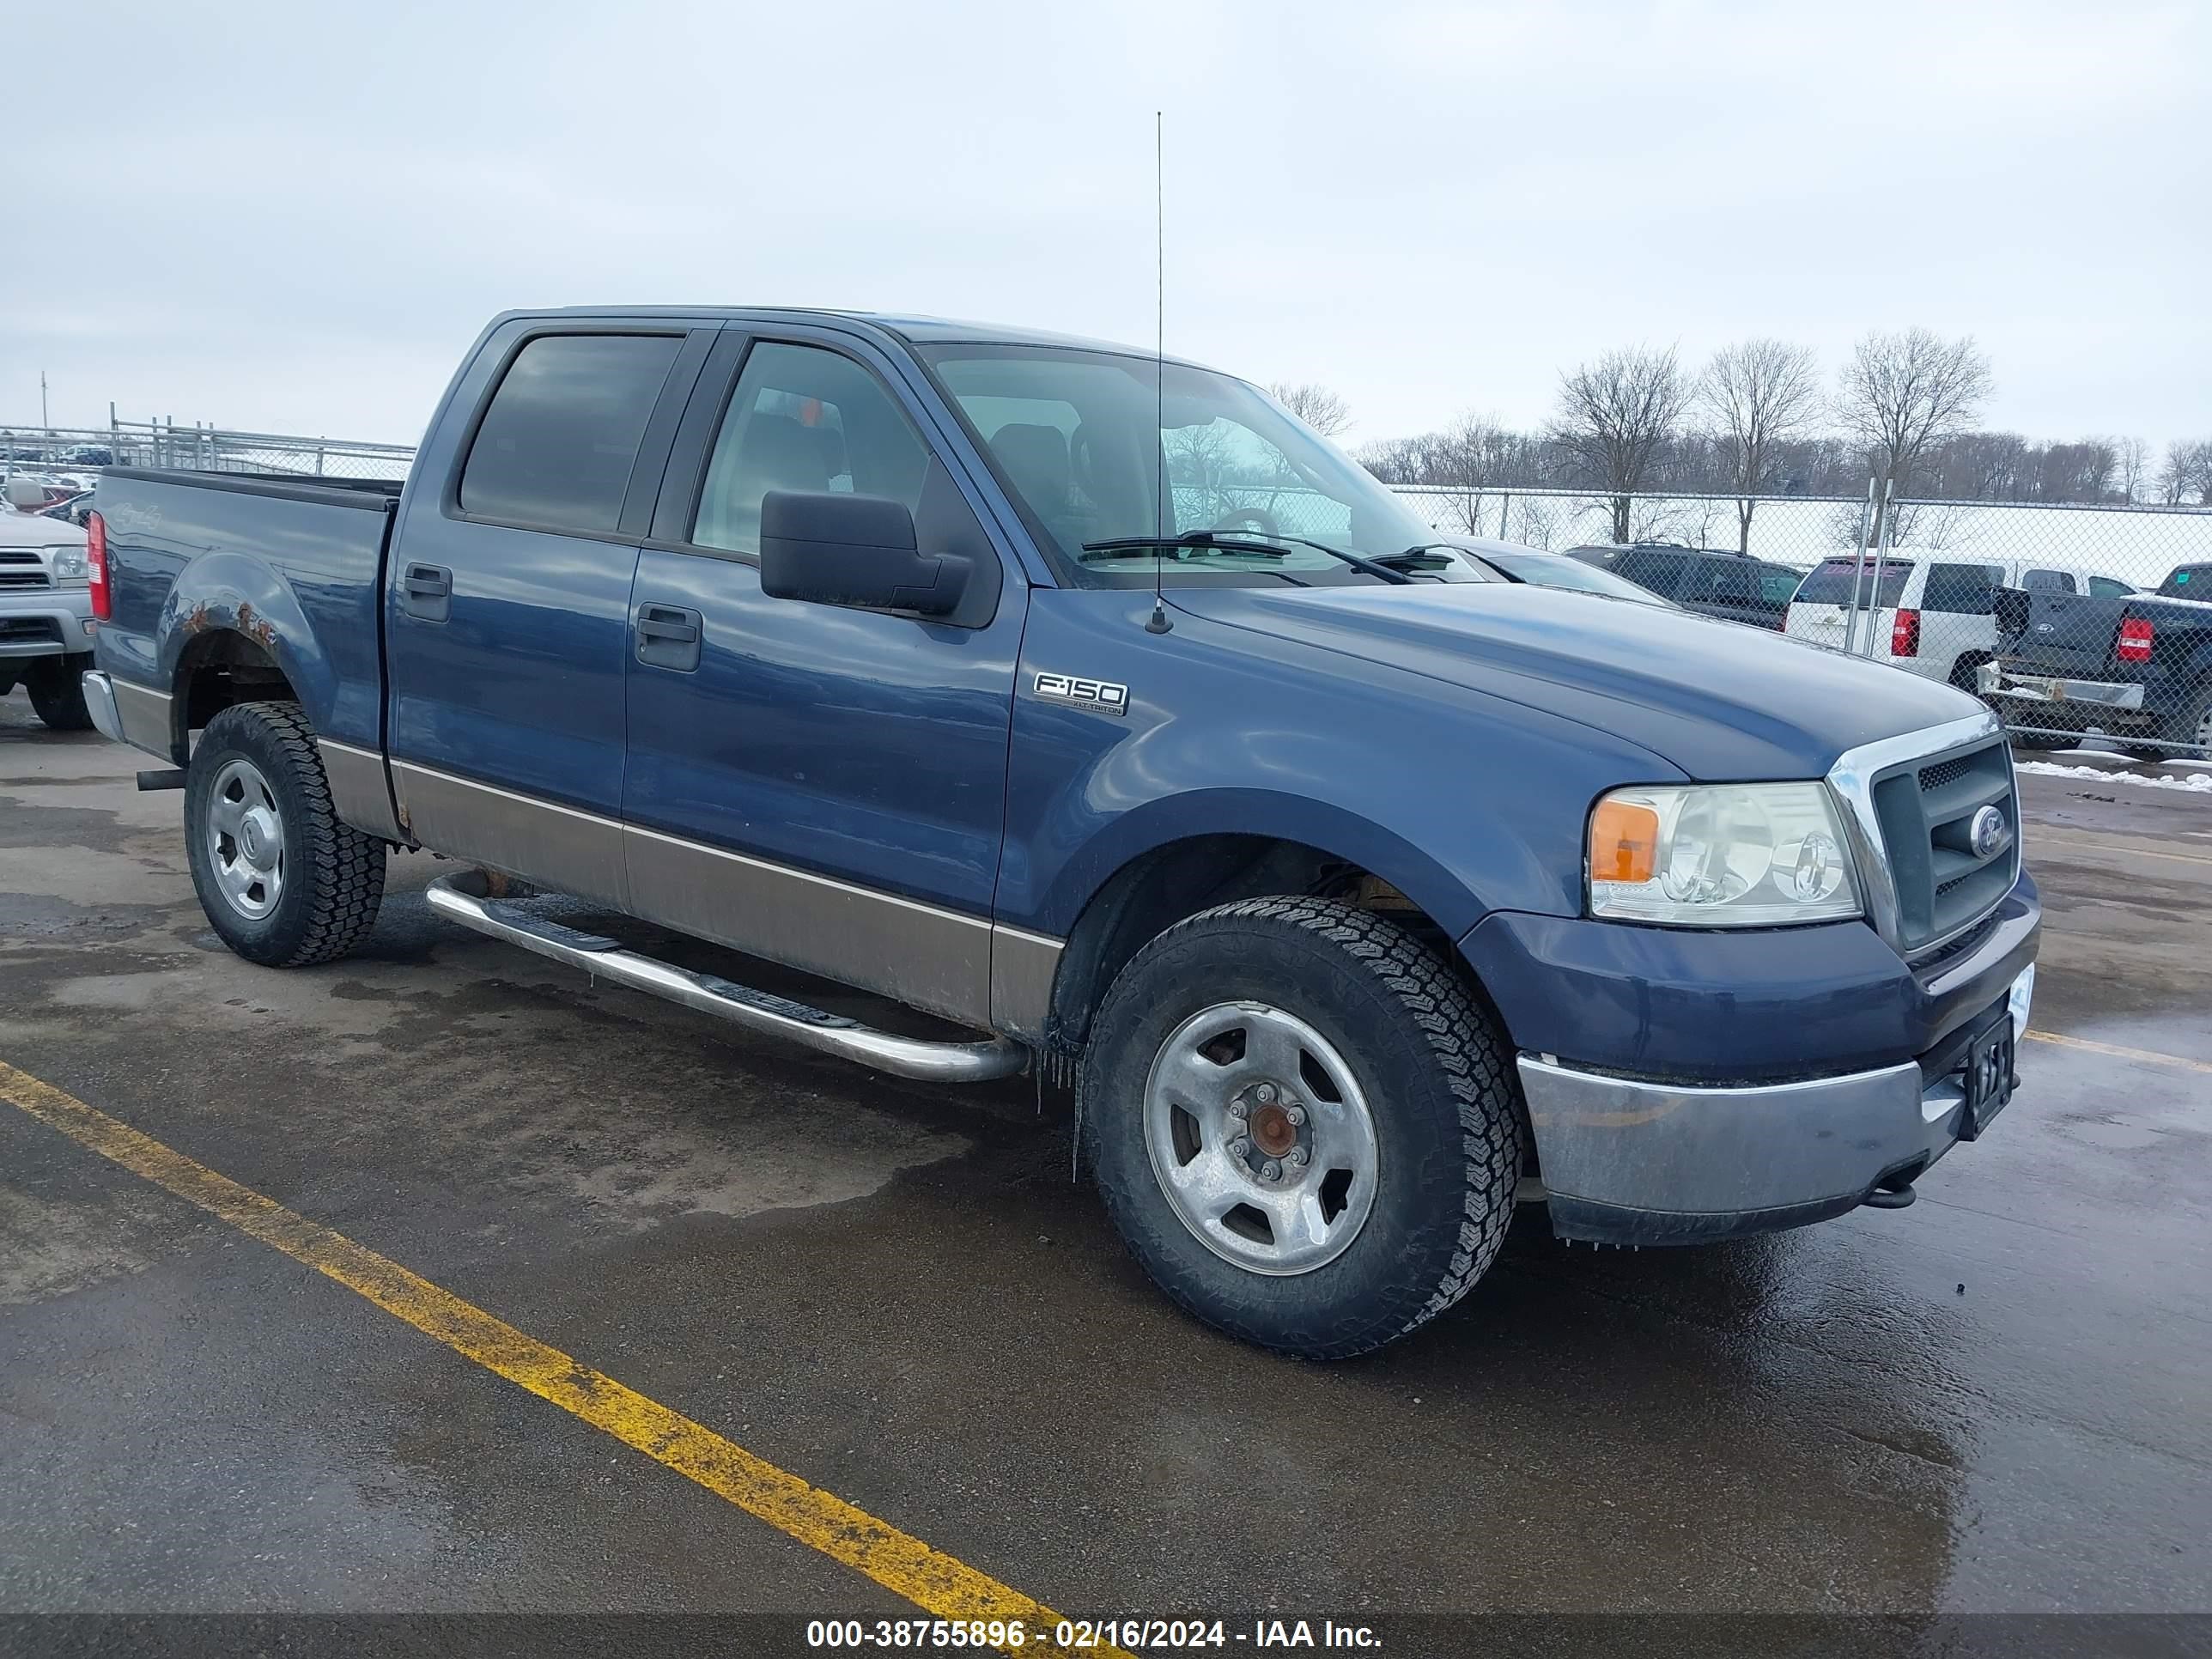 vin: 1FTRW14W85FB41591 1FTRW14W85FB41591 2005 ford f-150 4600 for Sale in 50069, 1000 Armstrong Dr, De Soto, USA